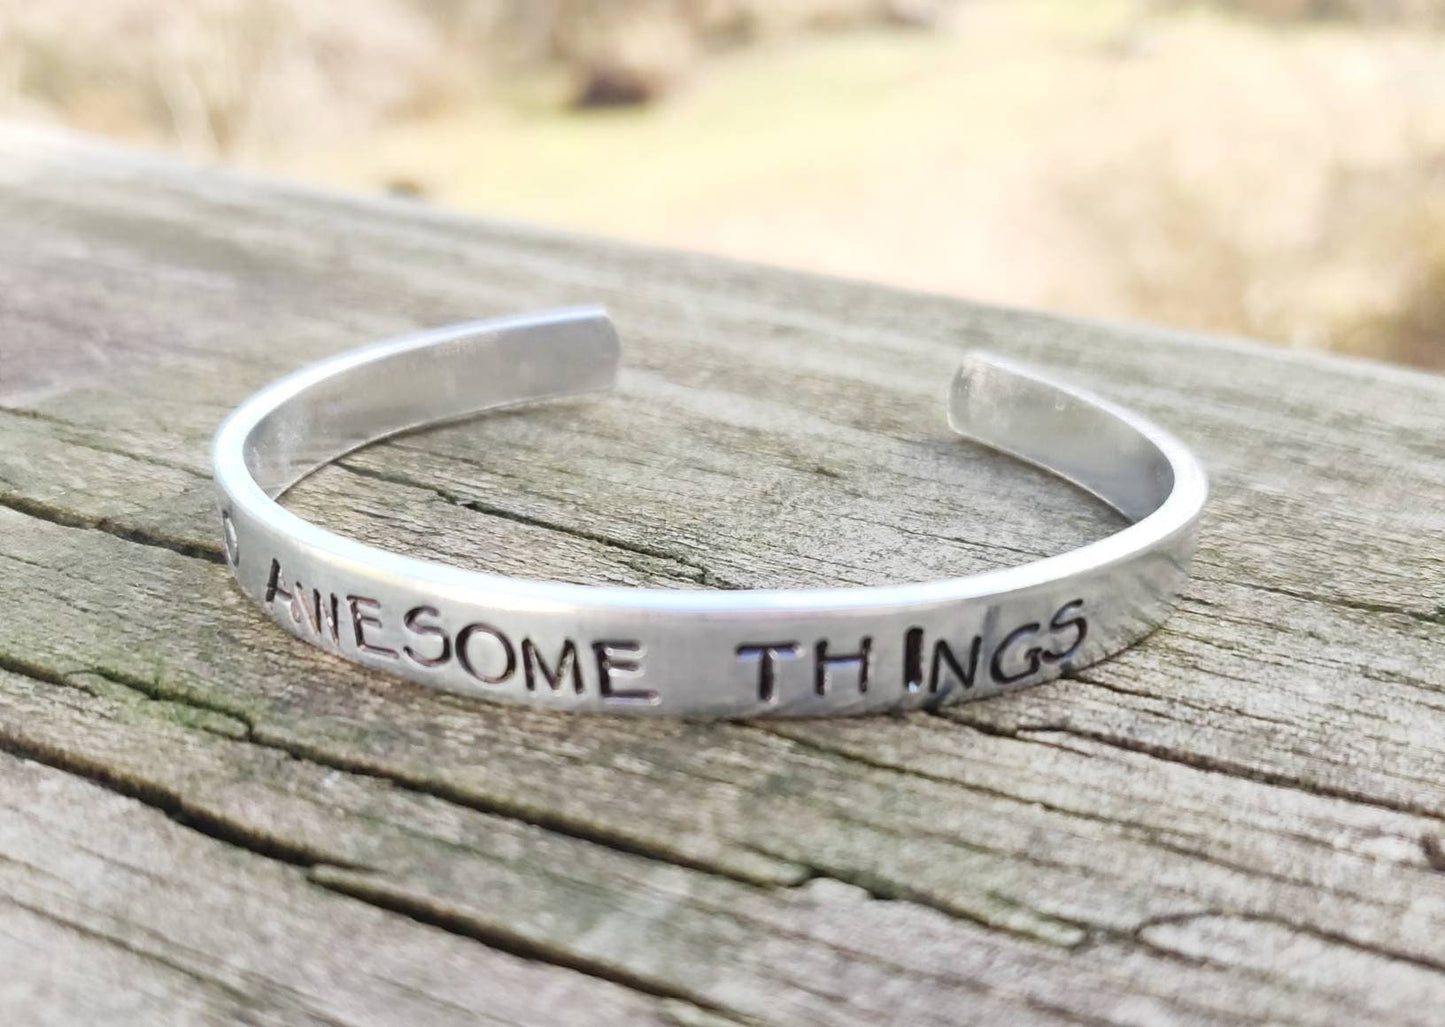 Do Awesome Things Cuff Bracelet, Inspirational Bracelet, Words Bracelet, Graduation Bracelet, Gift For Graduation, Graduation Gift